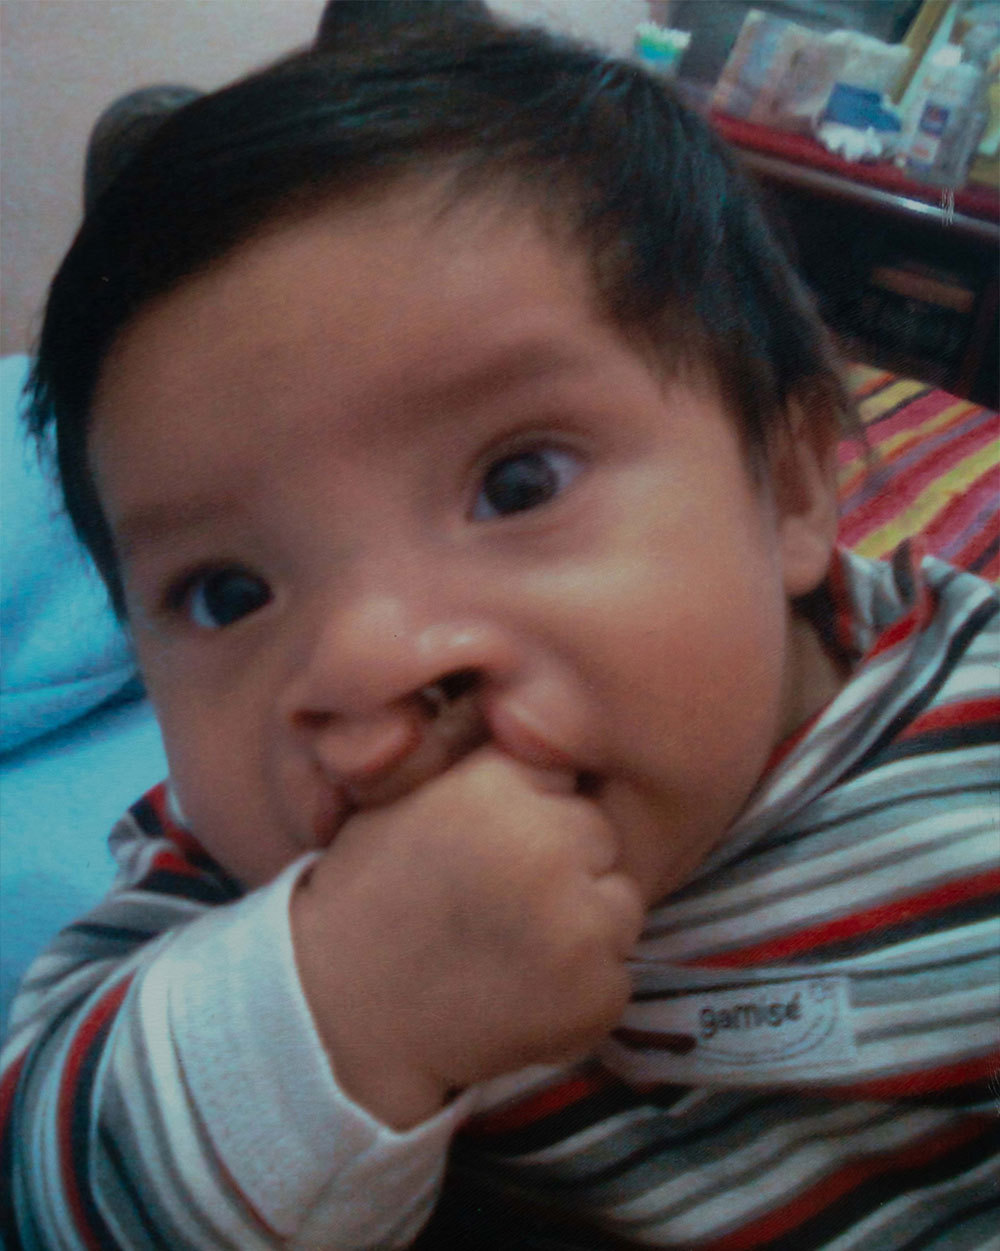 Bautista as a baby, before cleft surgery